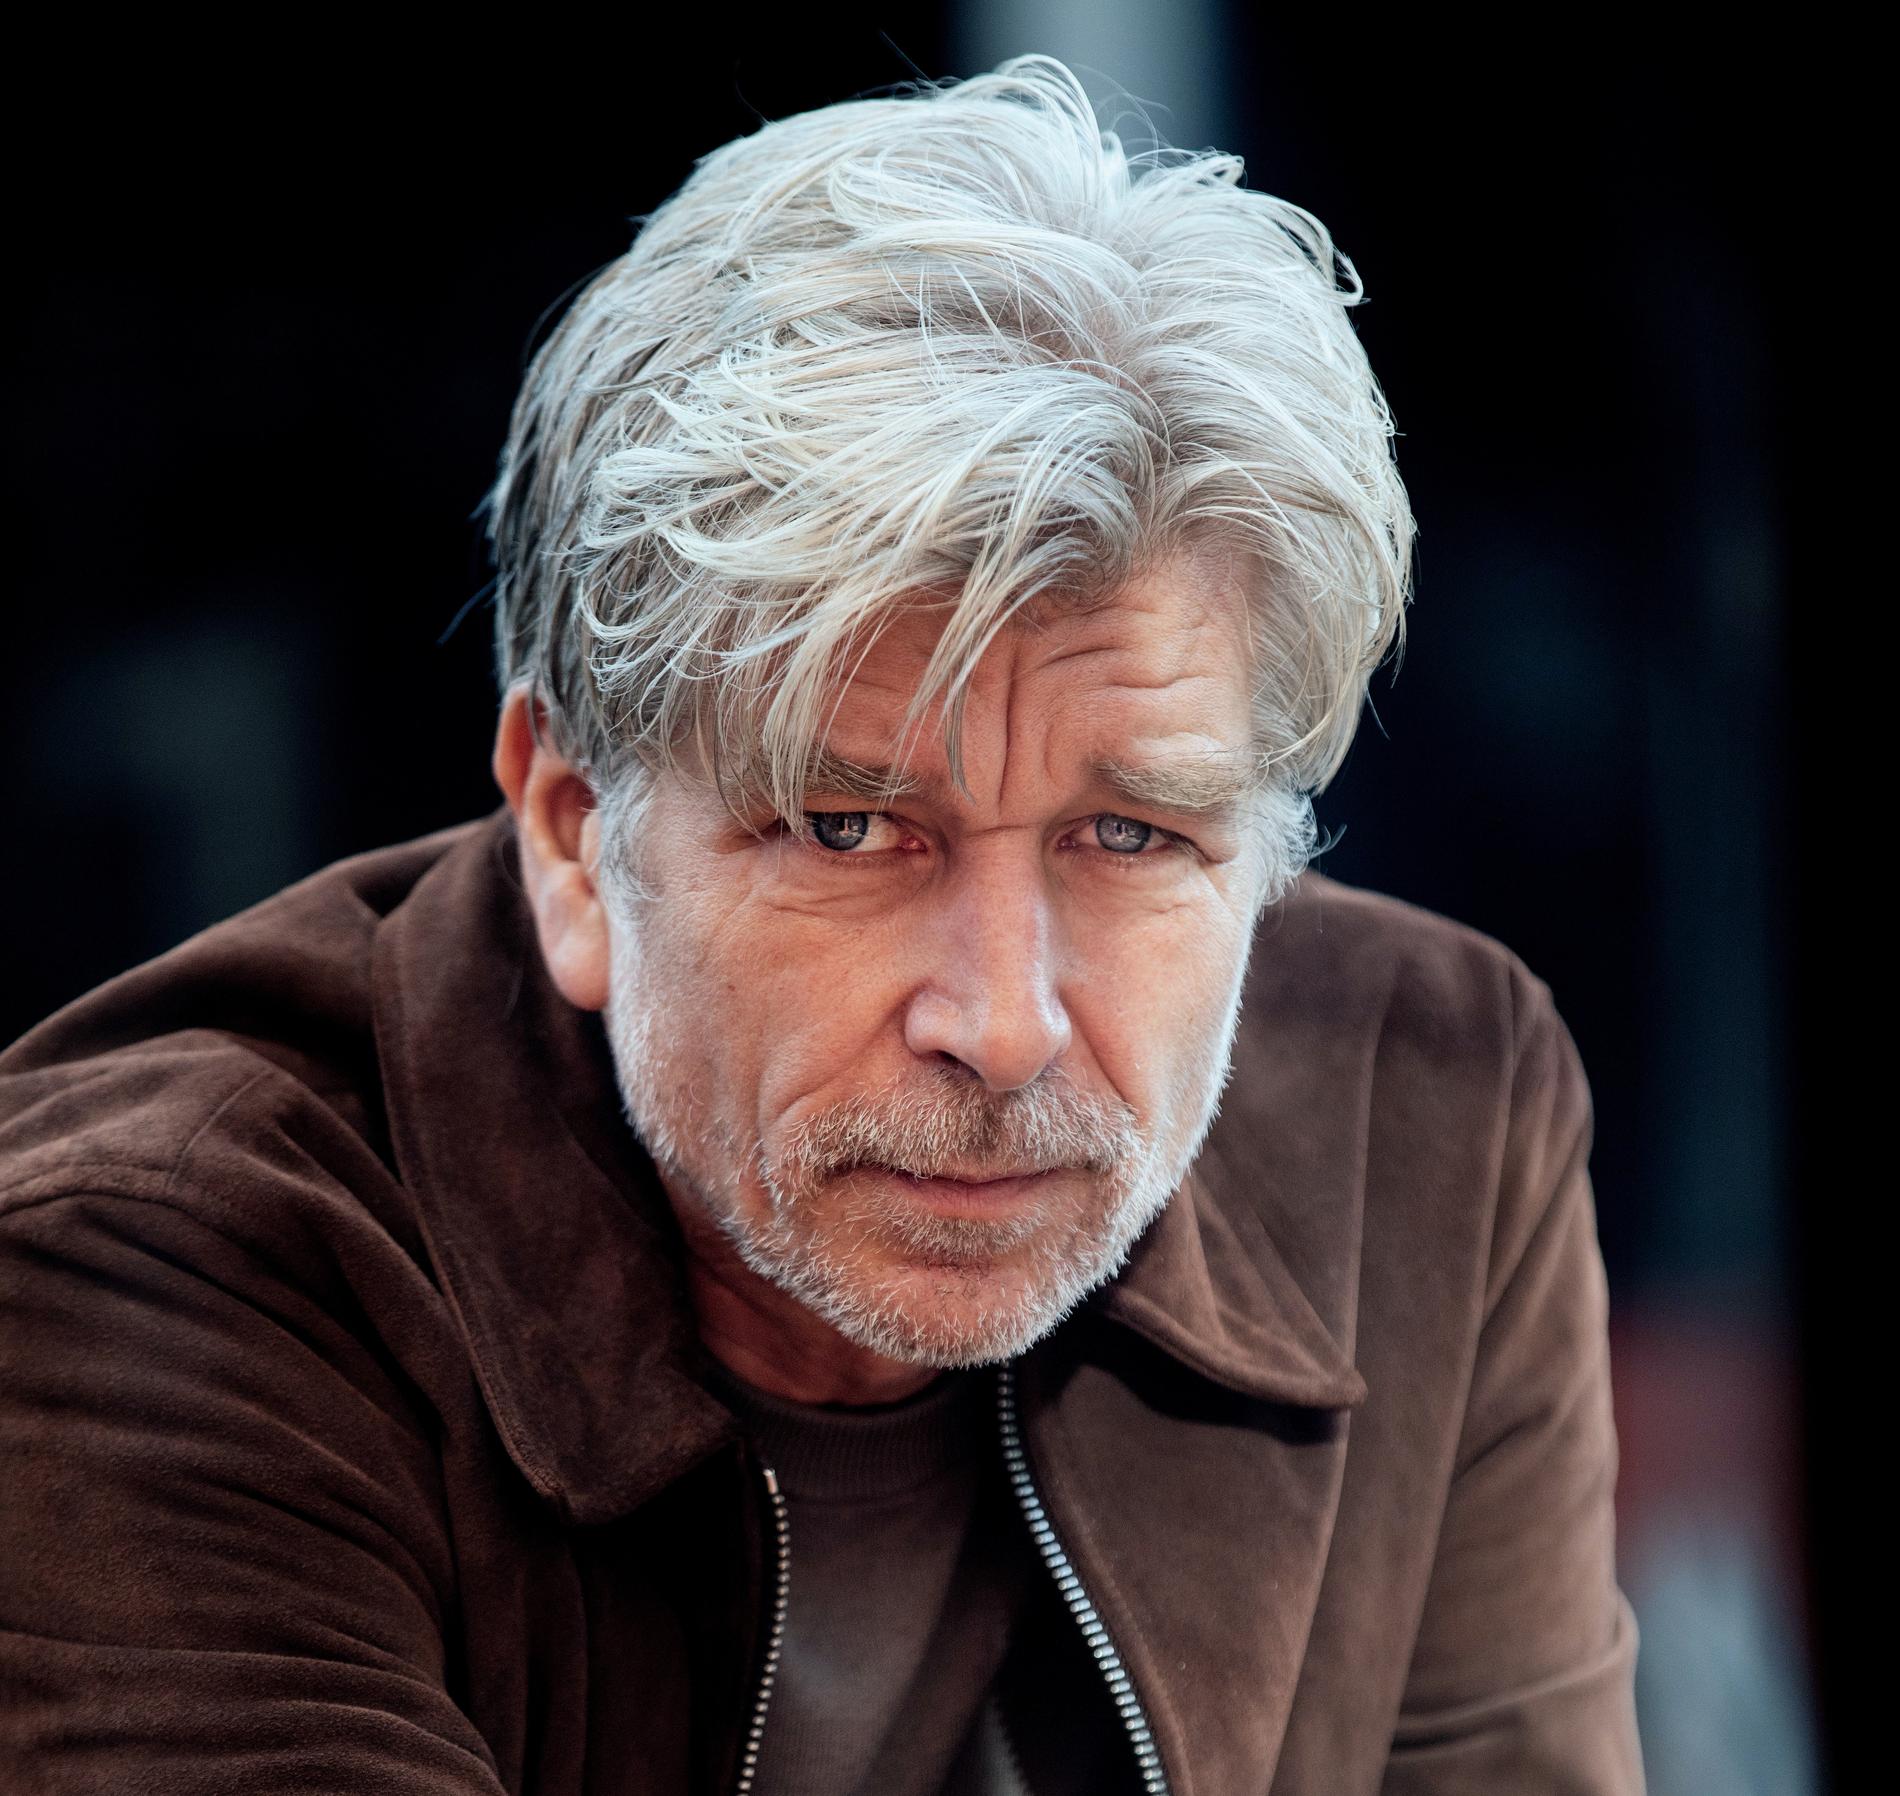 Karl Ove Knausgård was reported dead by a fake Twitter account